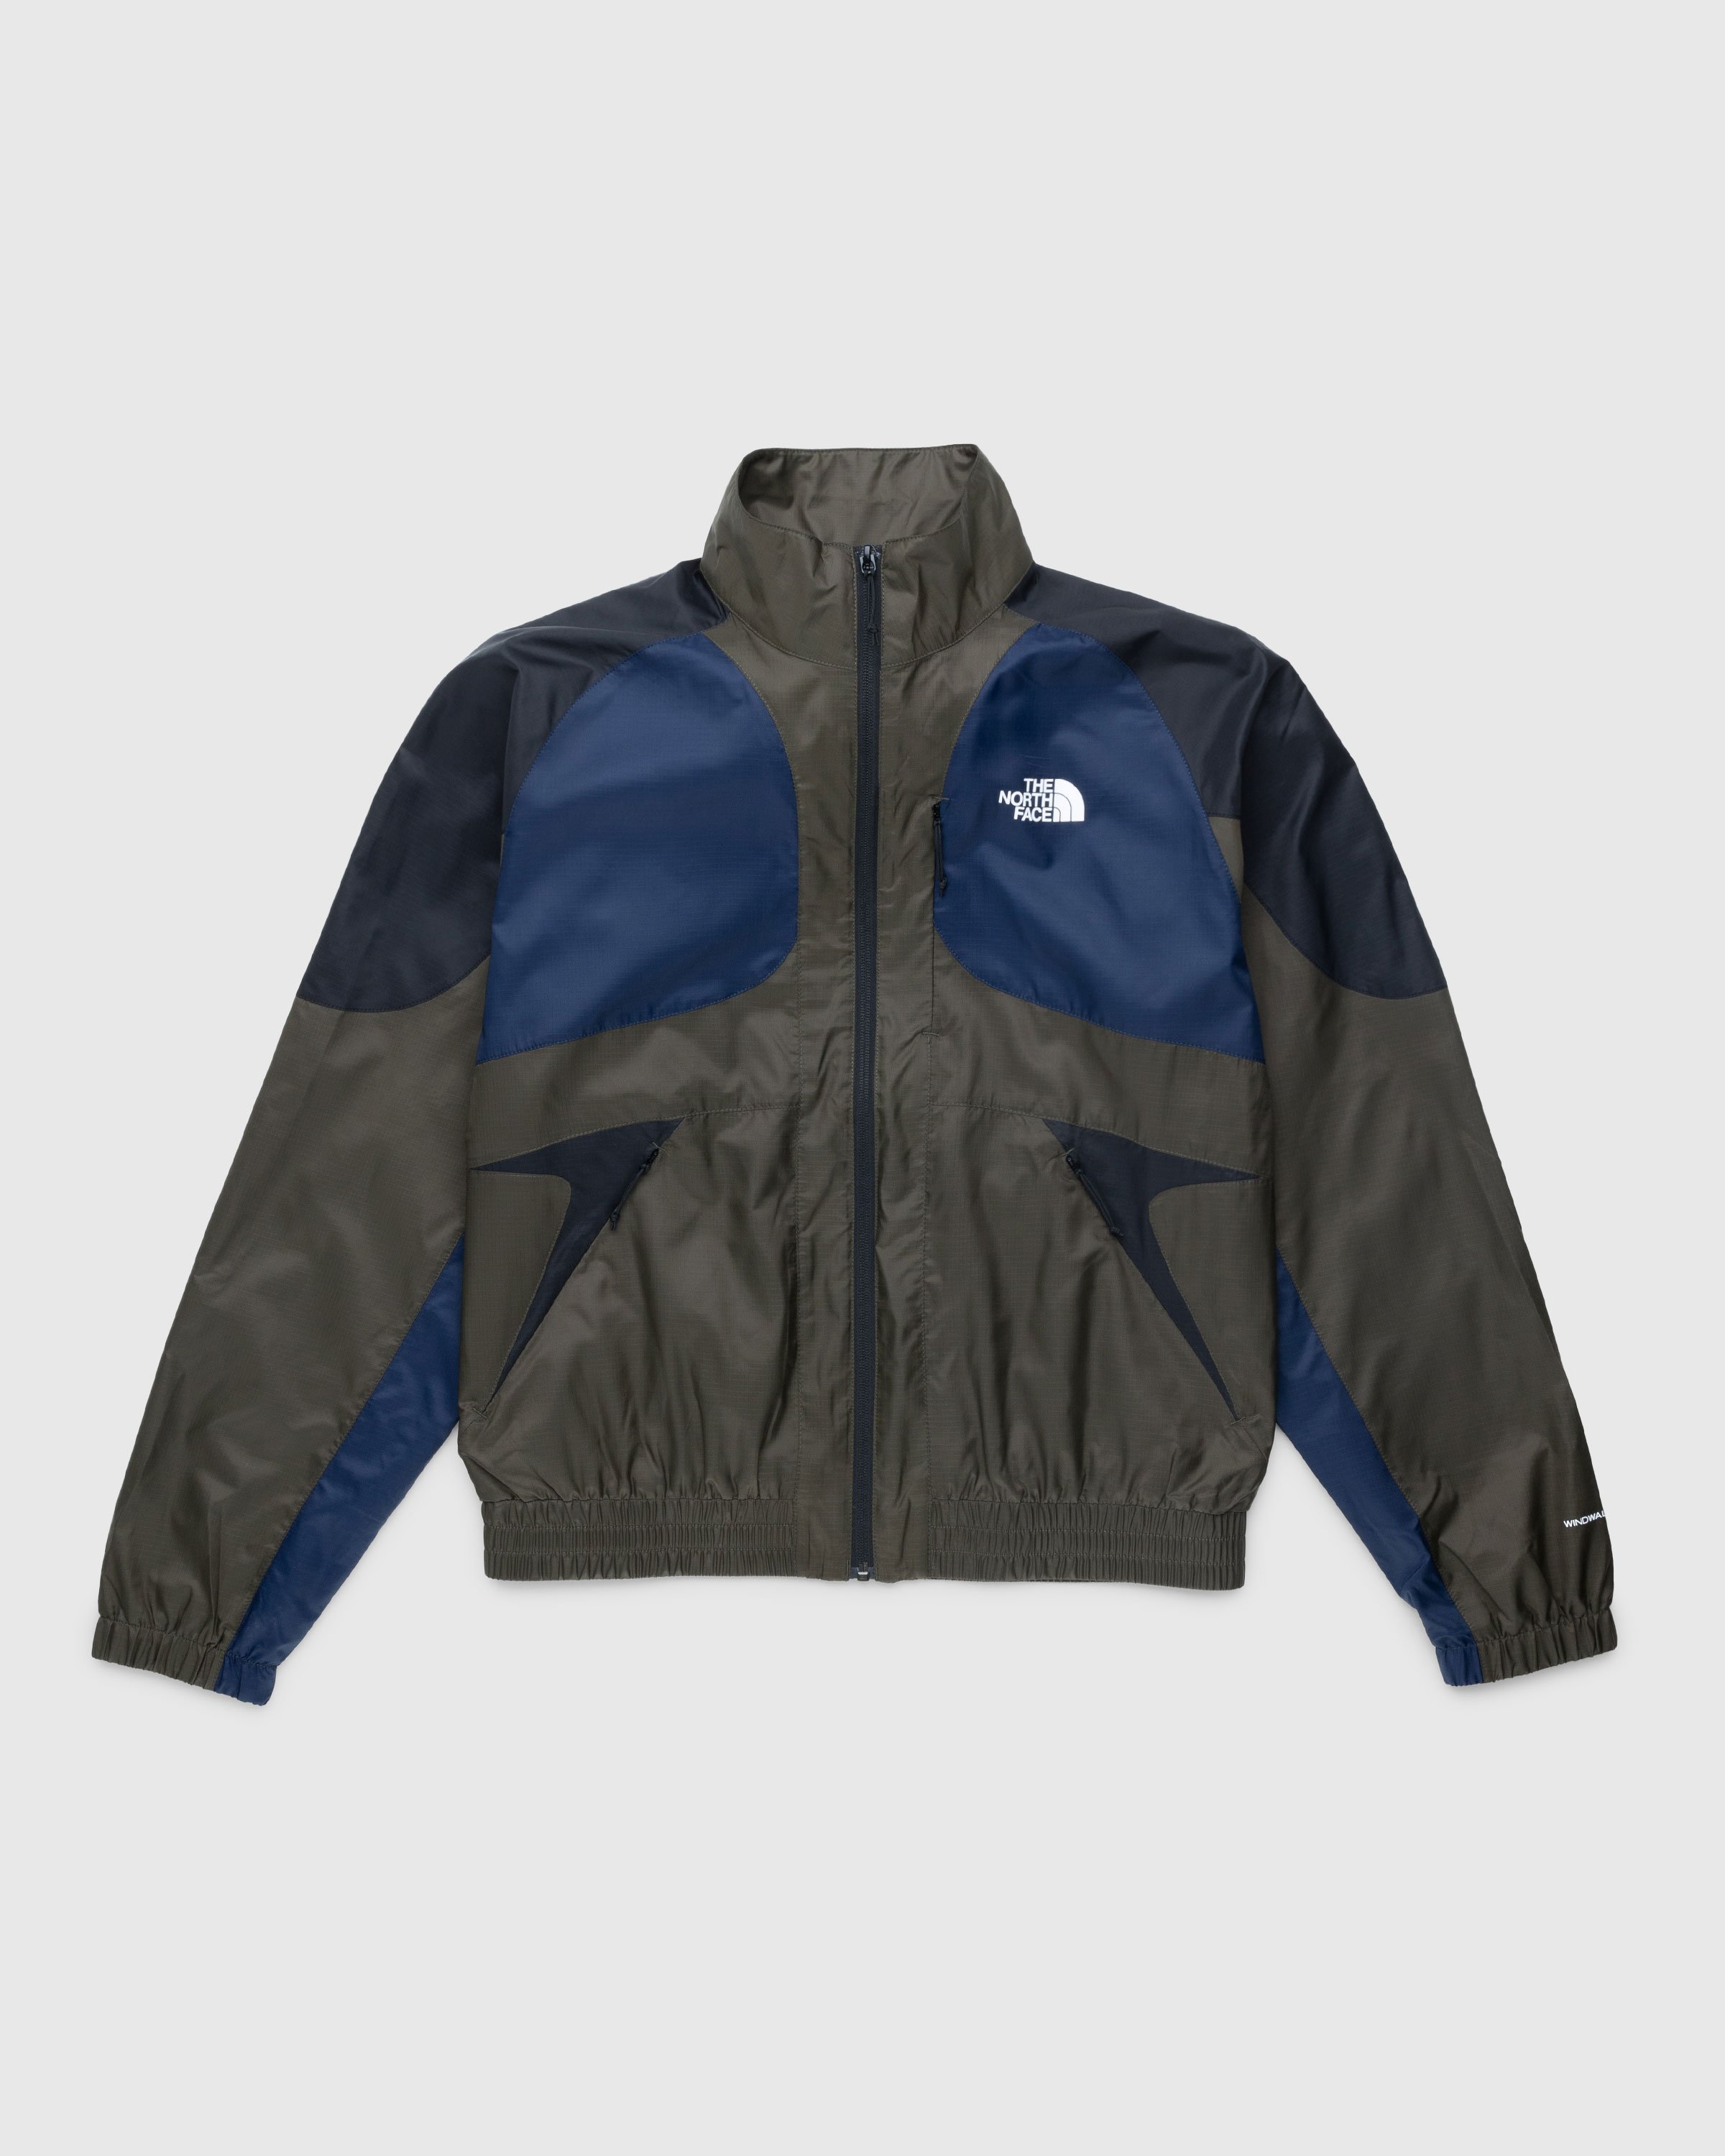 The North Face - TNF X Jacket Green - Clothing - Blue - Image 1